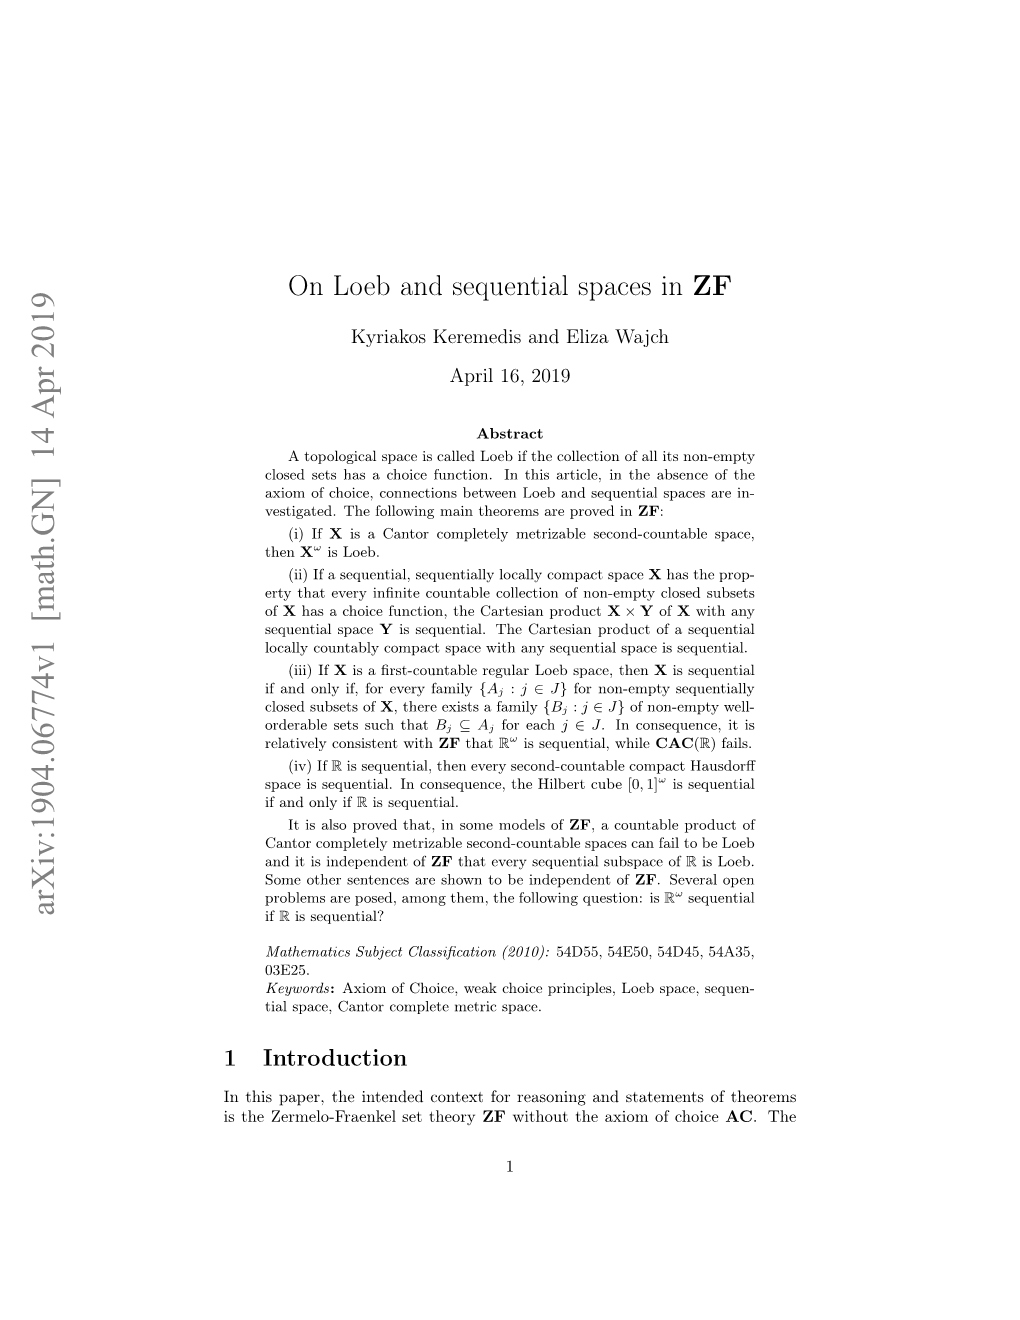 On Loeb and Sequential Spaces in $\Mathbf {ZF} $